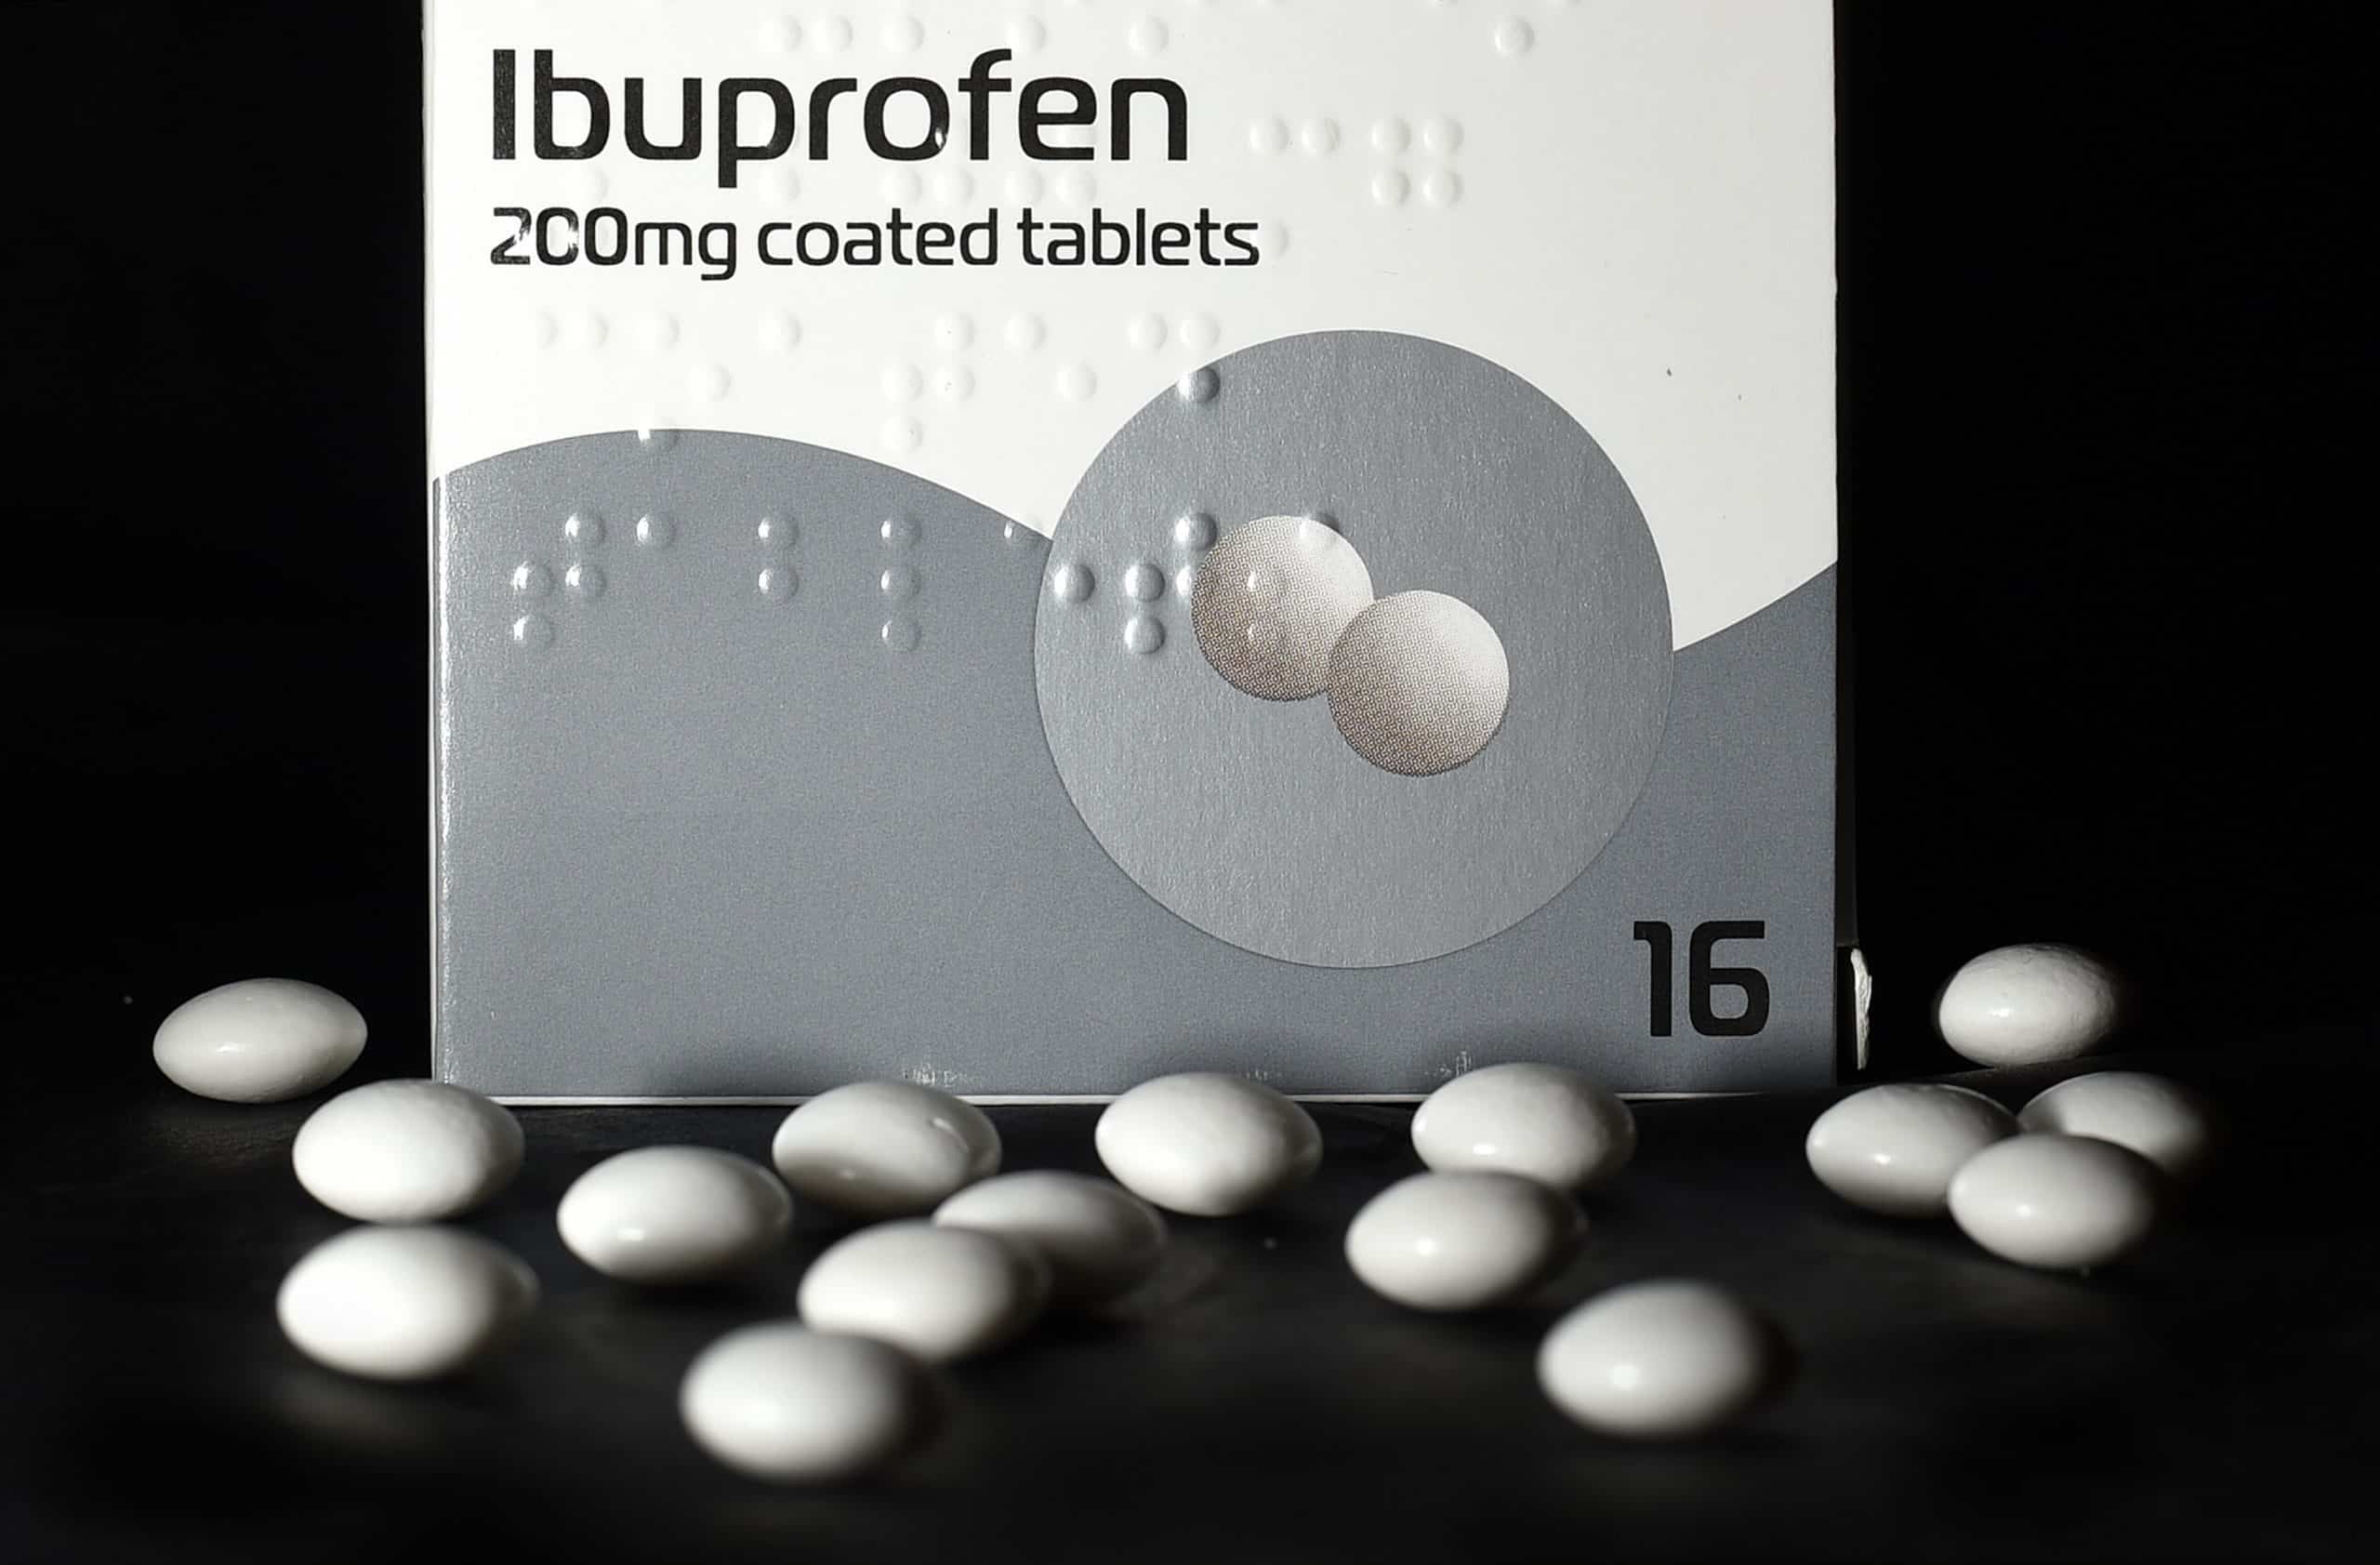 Clear guidance on ibuprofen issued after confusion